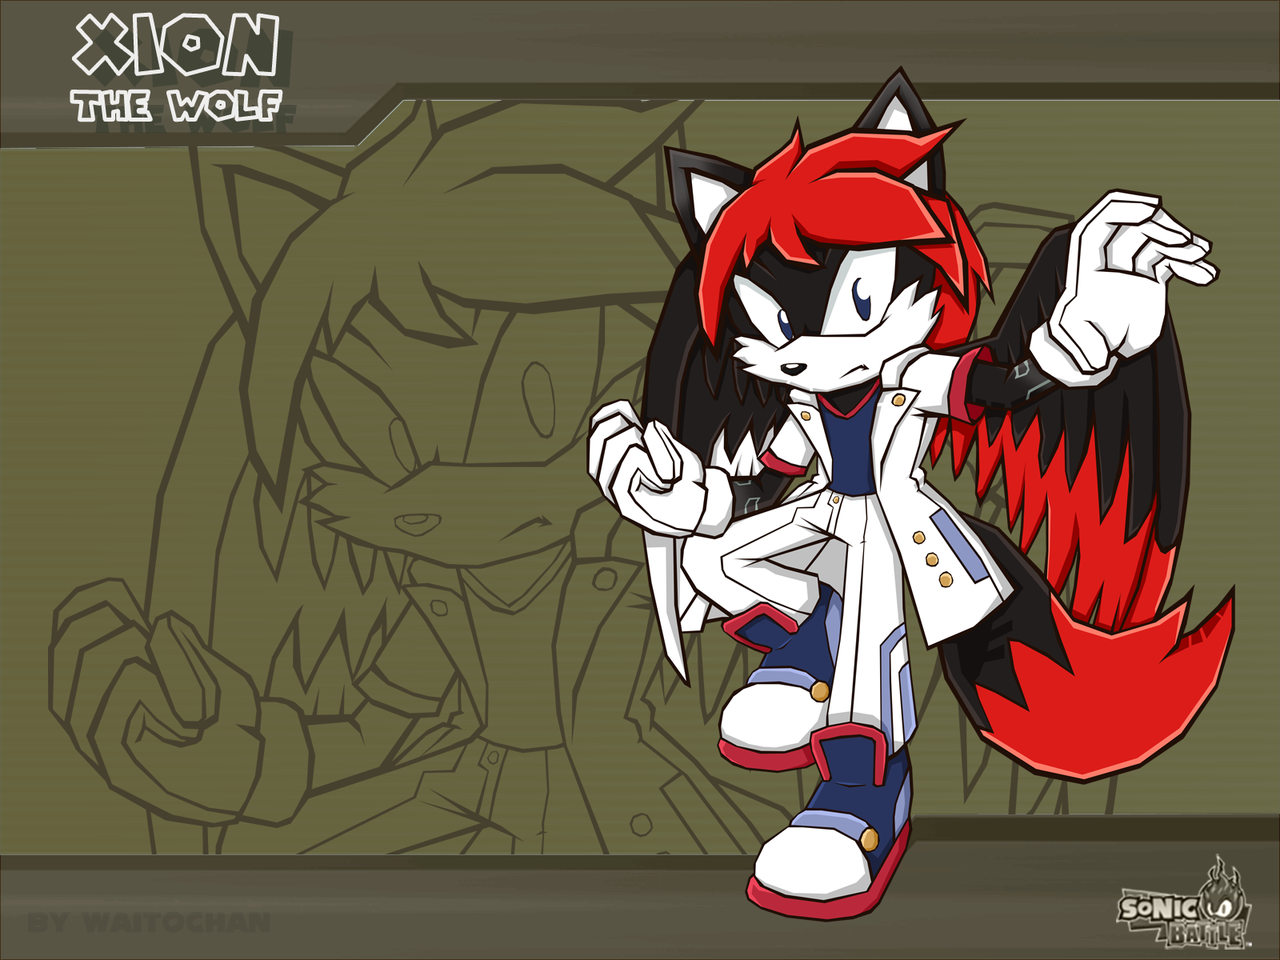 Xion The Wolf - Sonic Battle